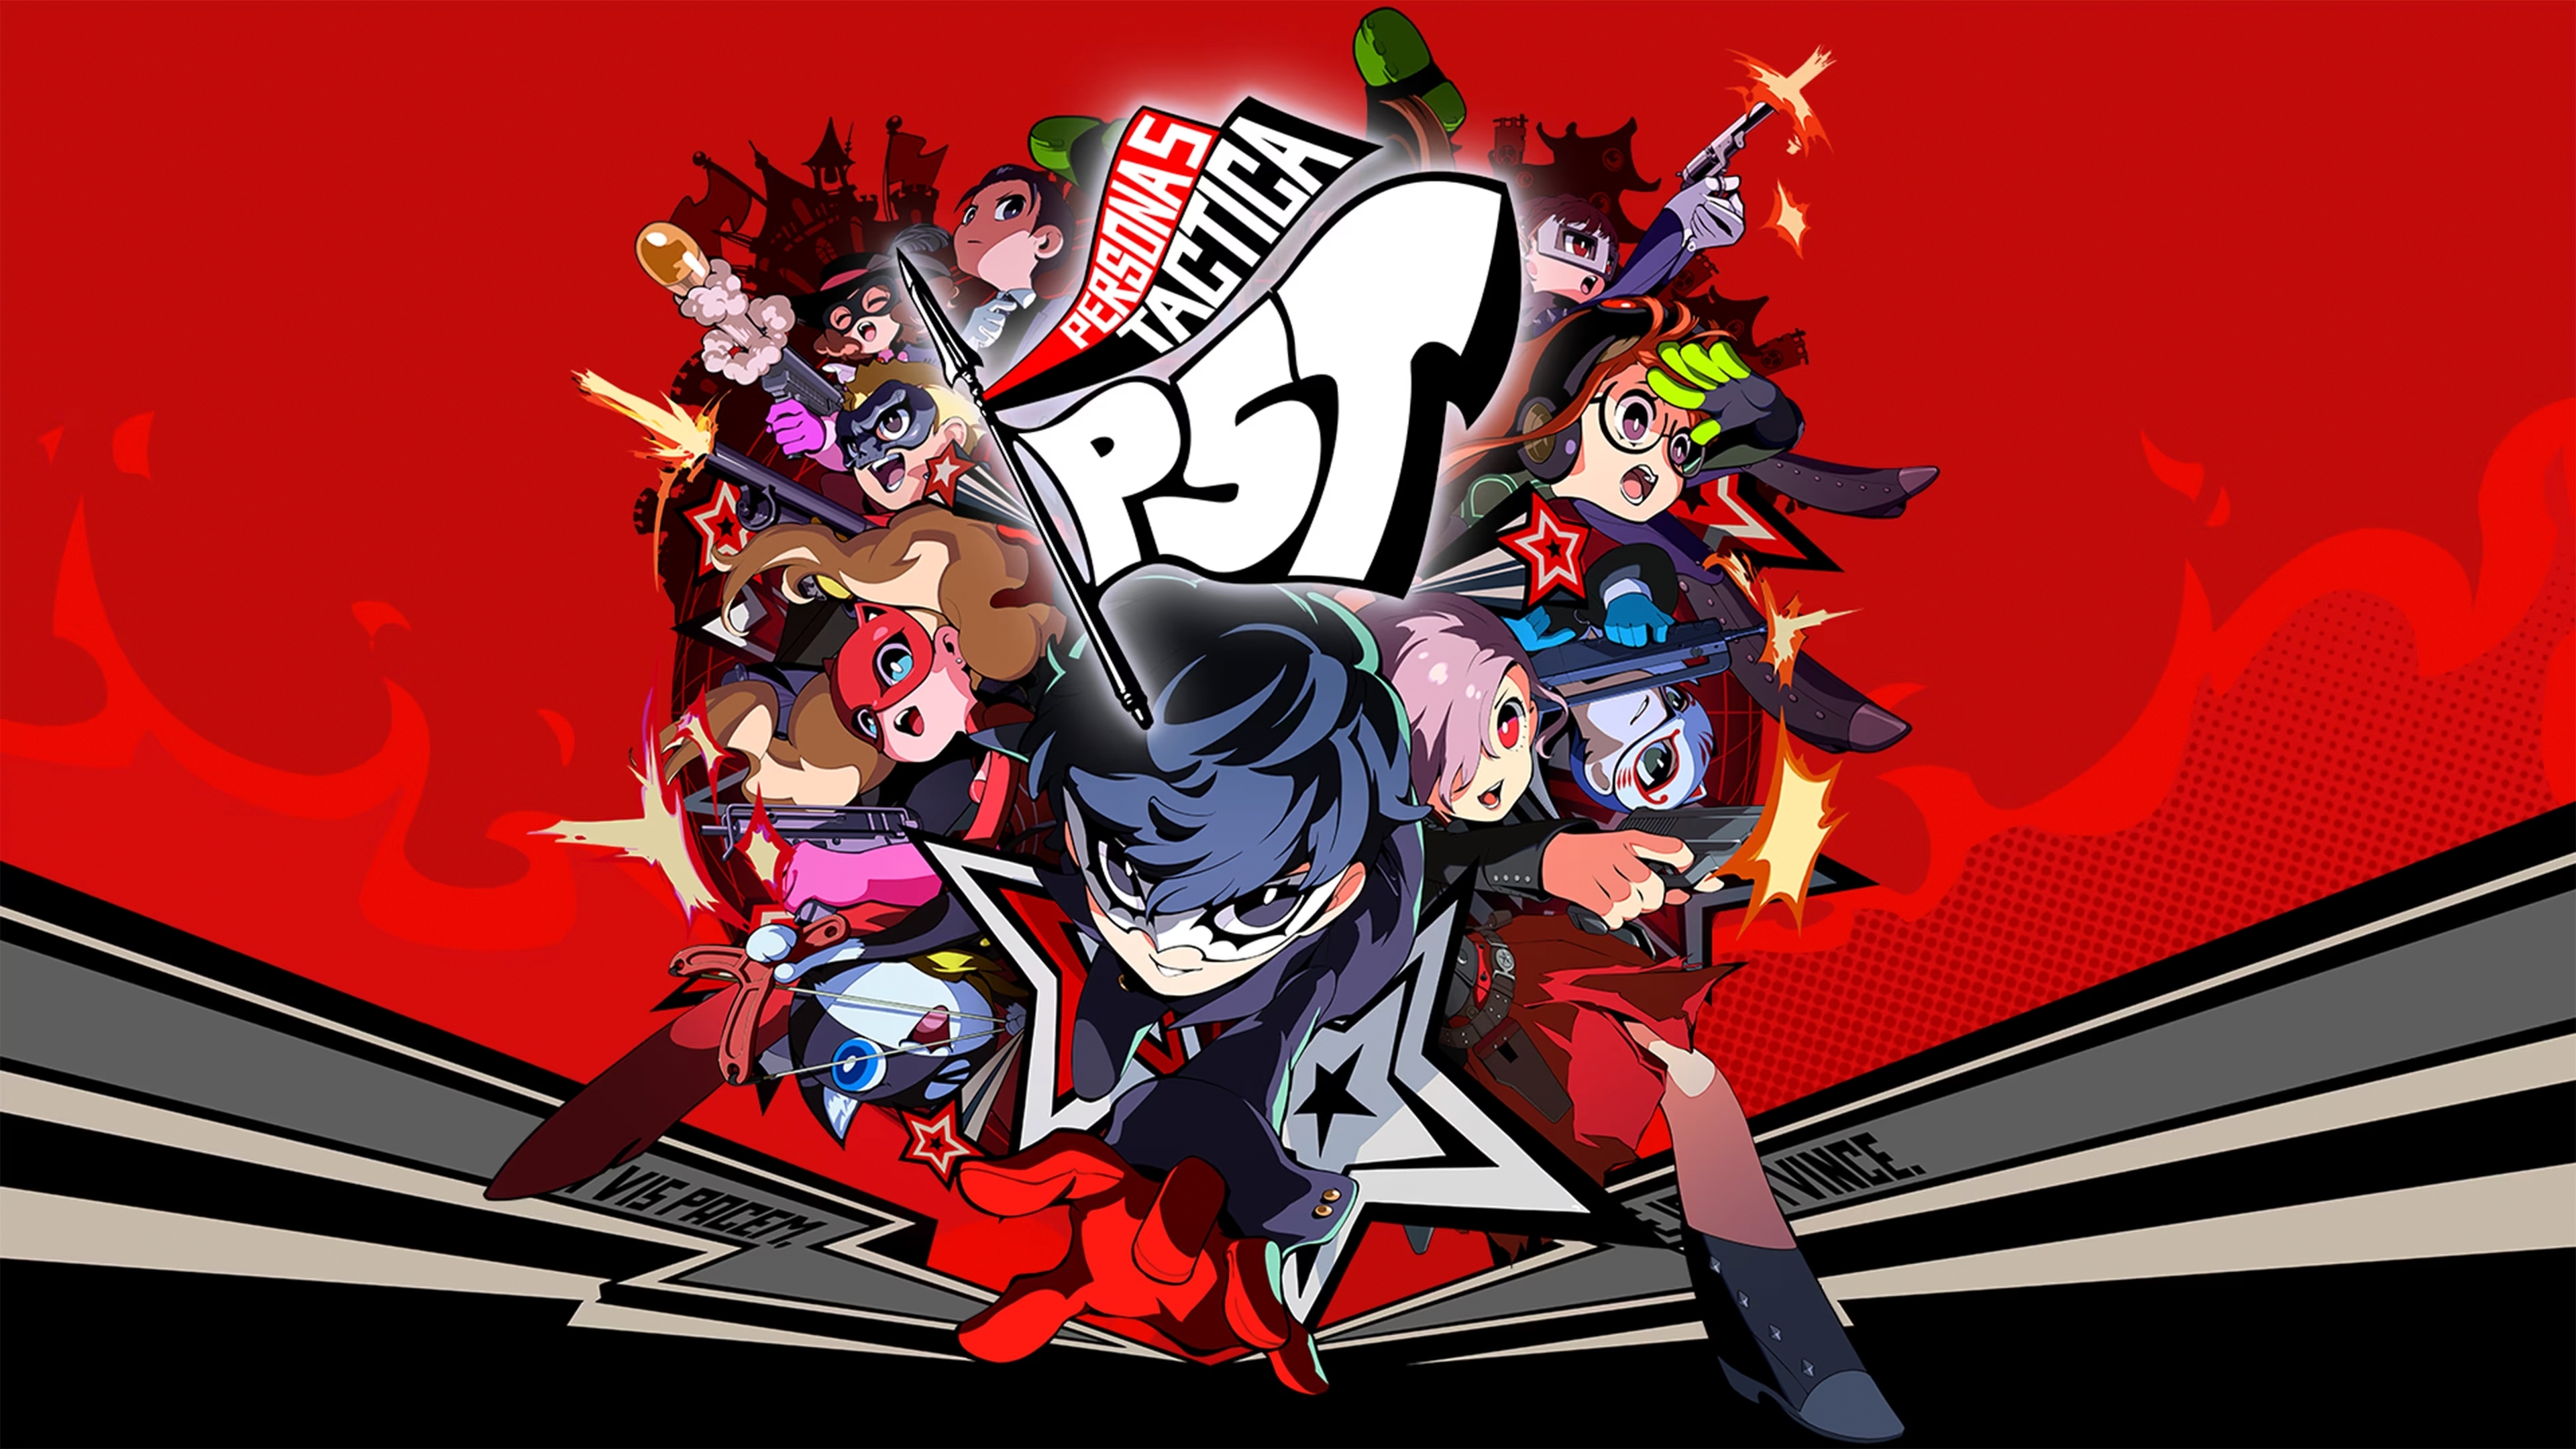 Persona 5 Strikers 30 Minutes of English Gameplay Footage